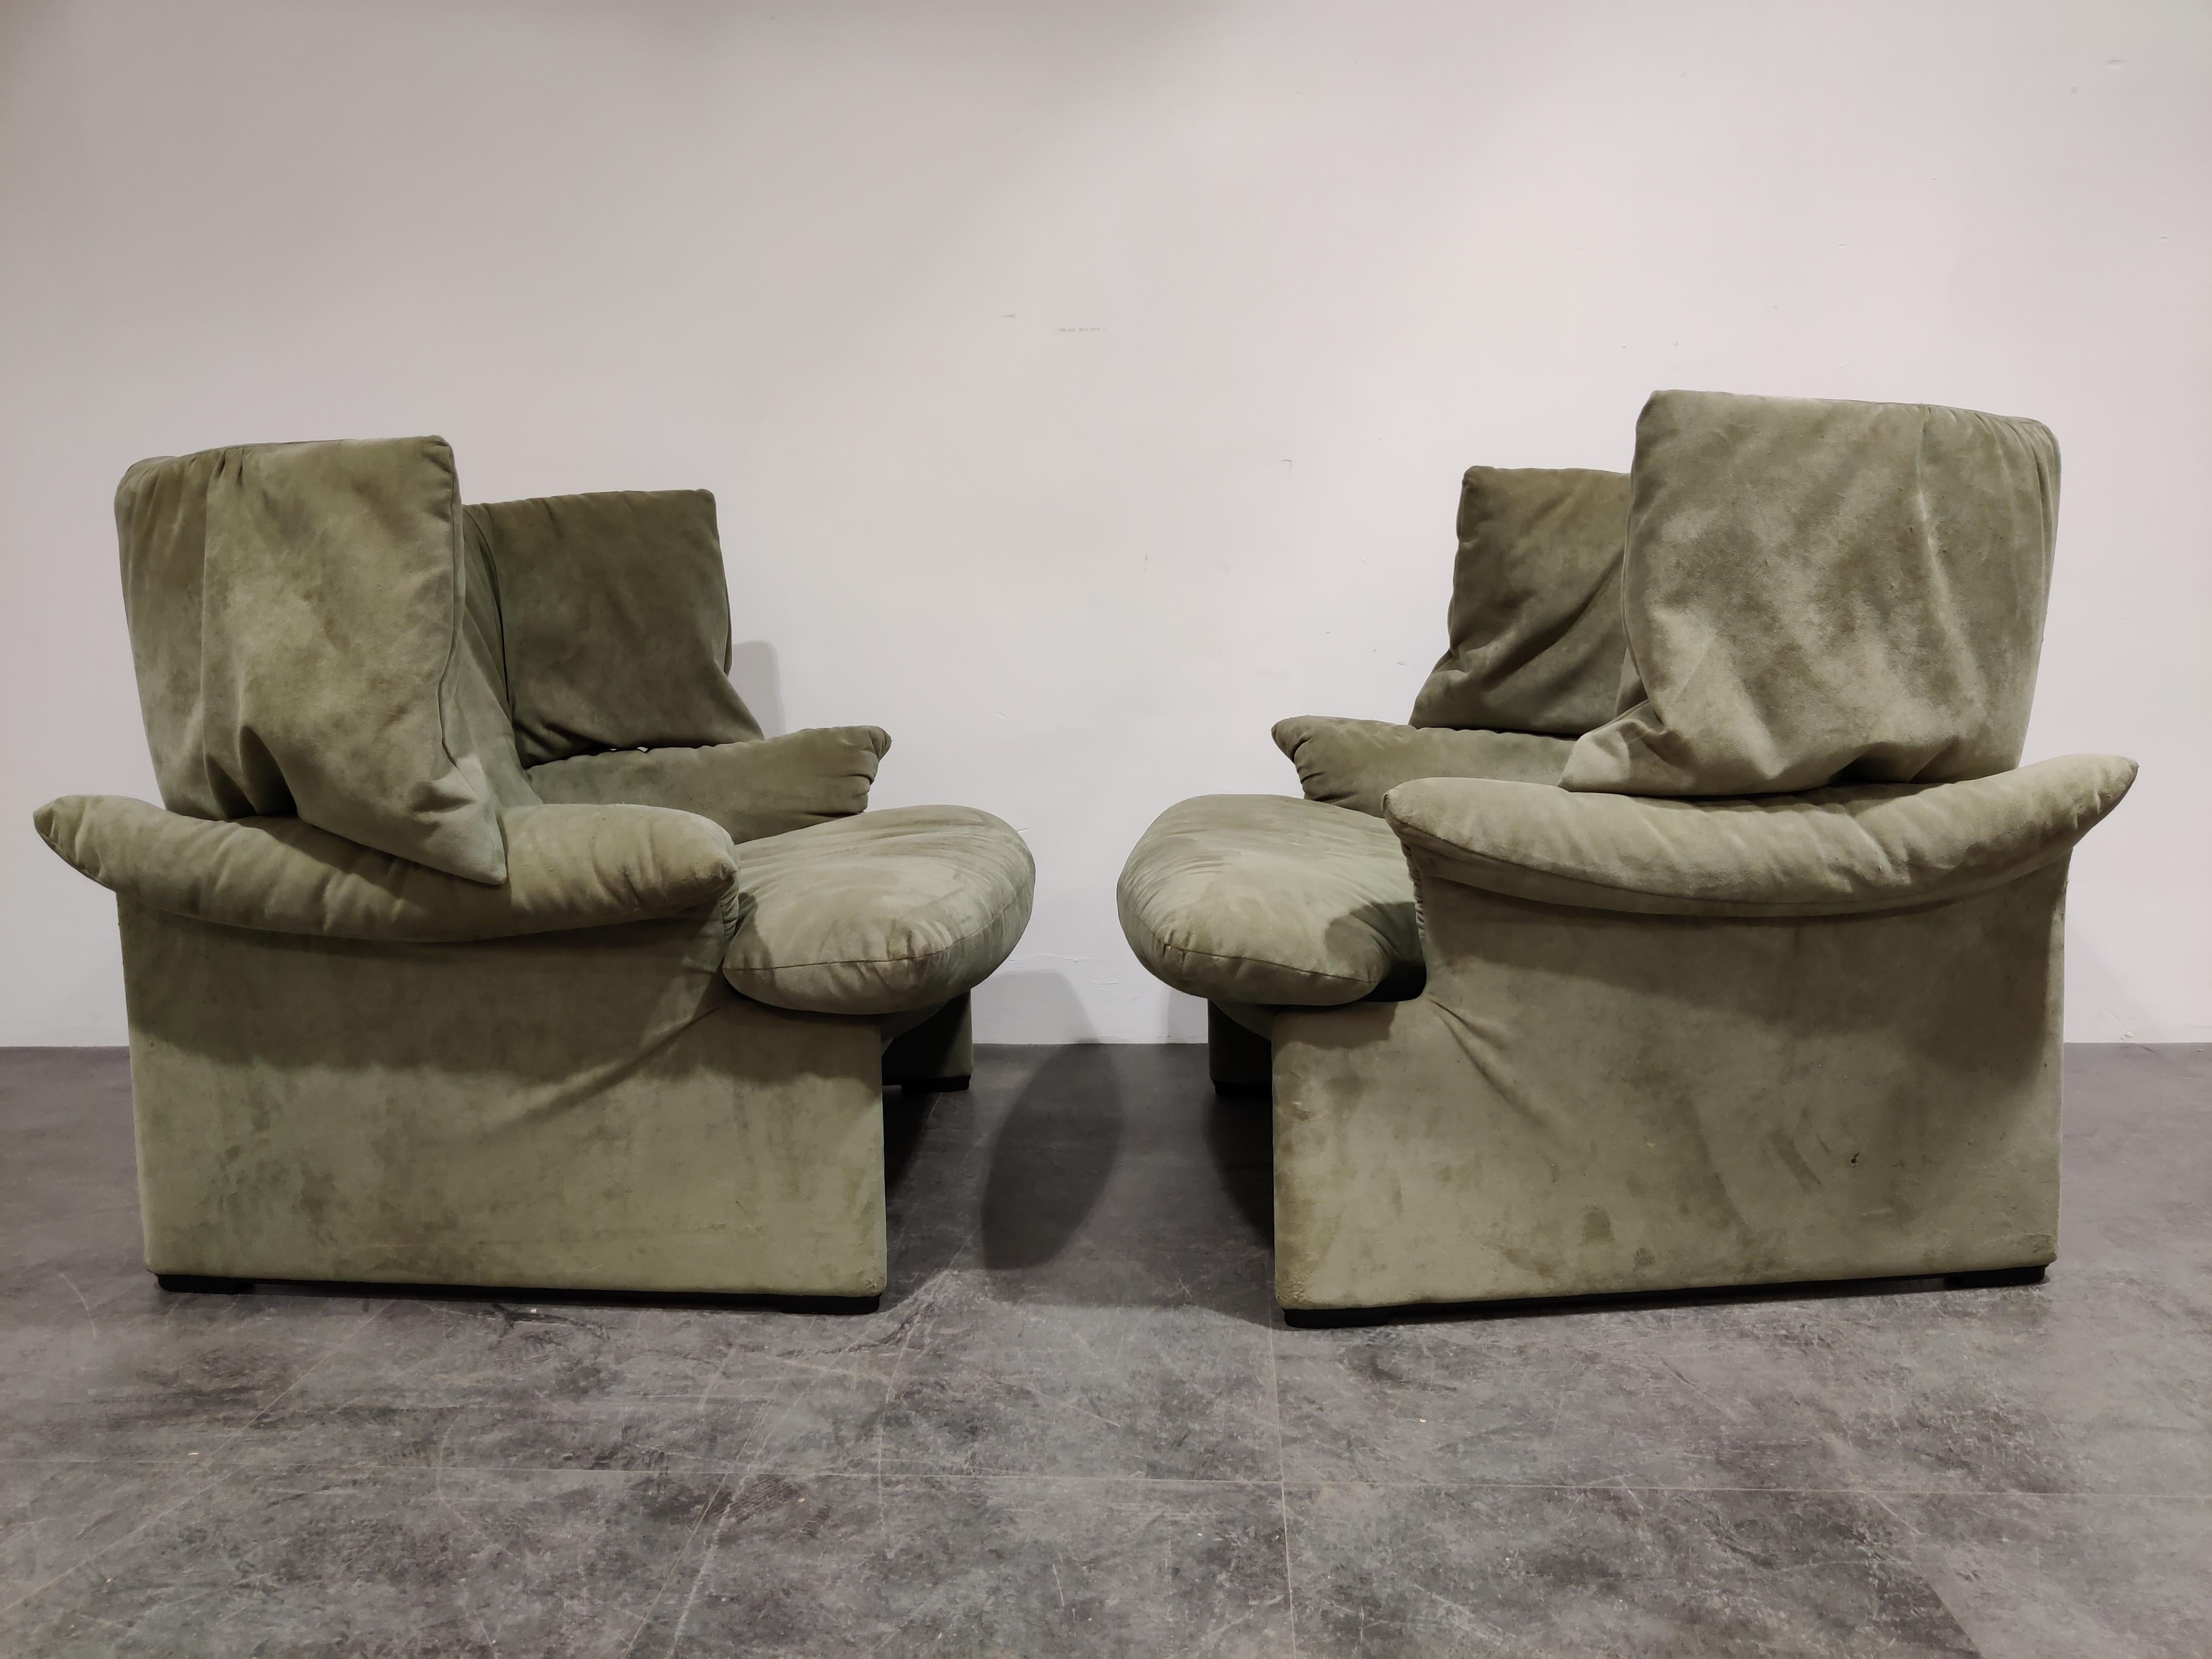 Pair of exquisite olive green velvet portovenere wingback chairs designed by Vico Magsitretti for Cassina.

This chairs are beyond comfortable. Once seated you will stay seated in them for a long while...

This design is less know then the